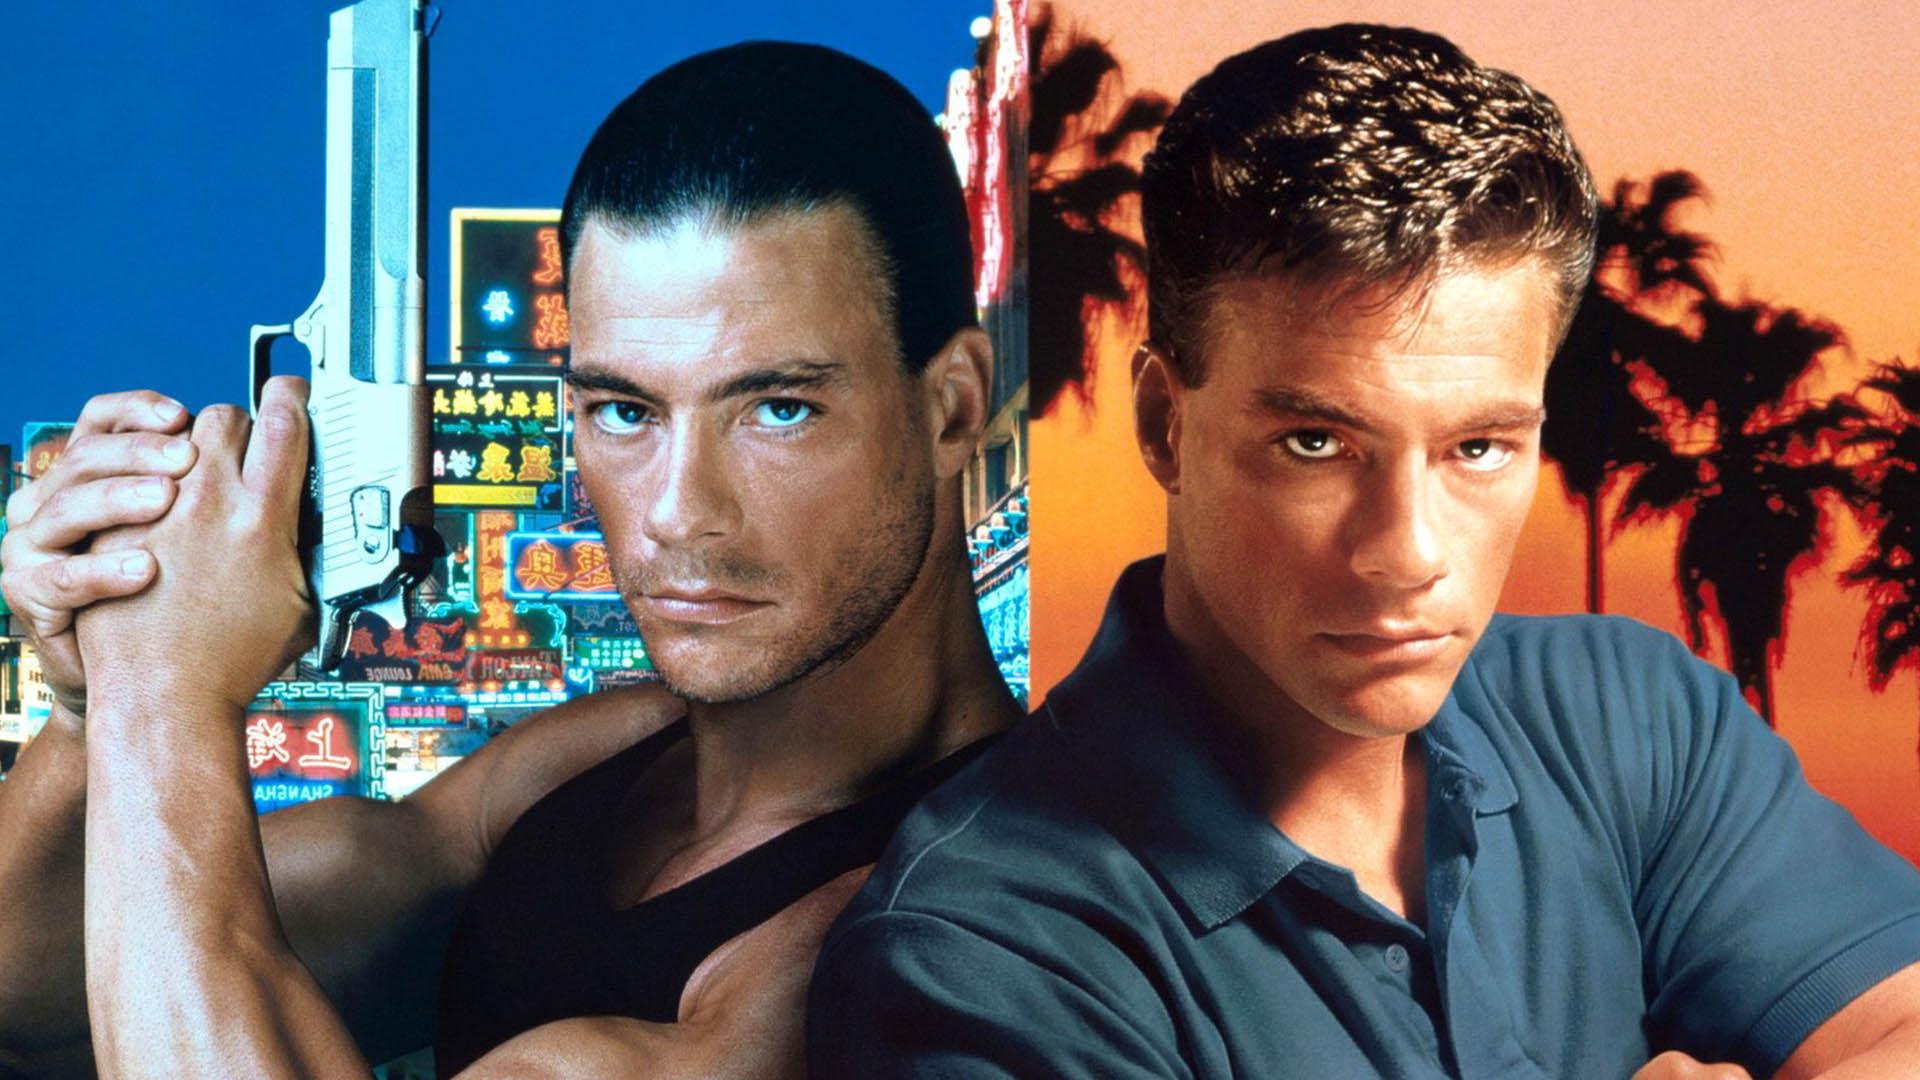 Twin brothers in the story of the movie Double Impact